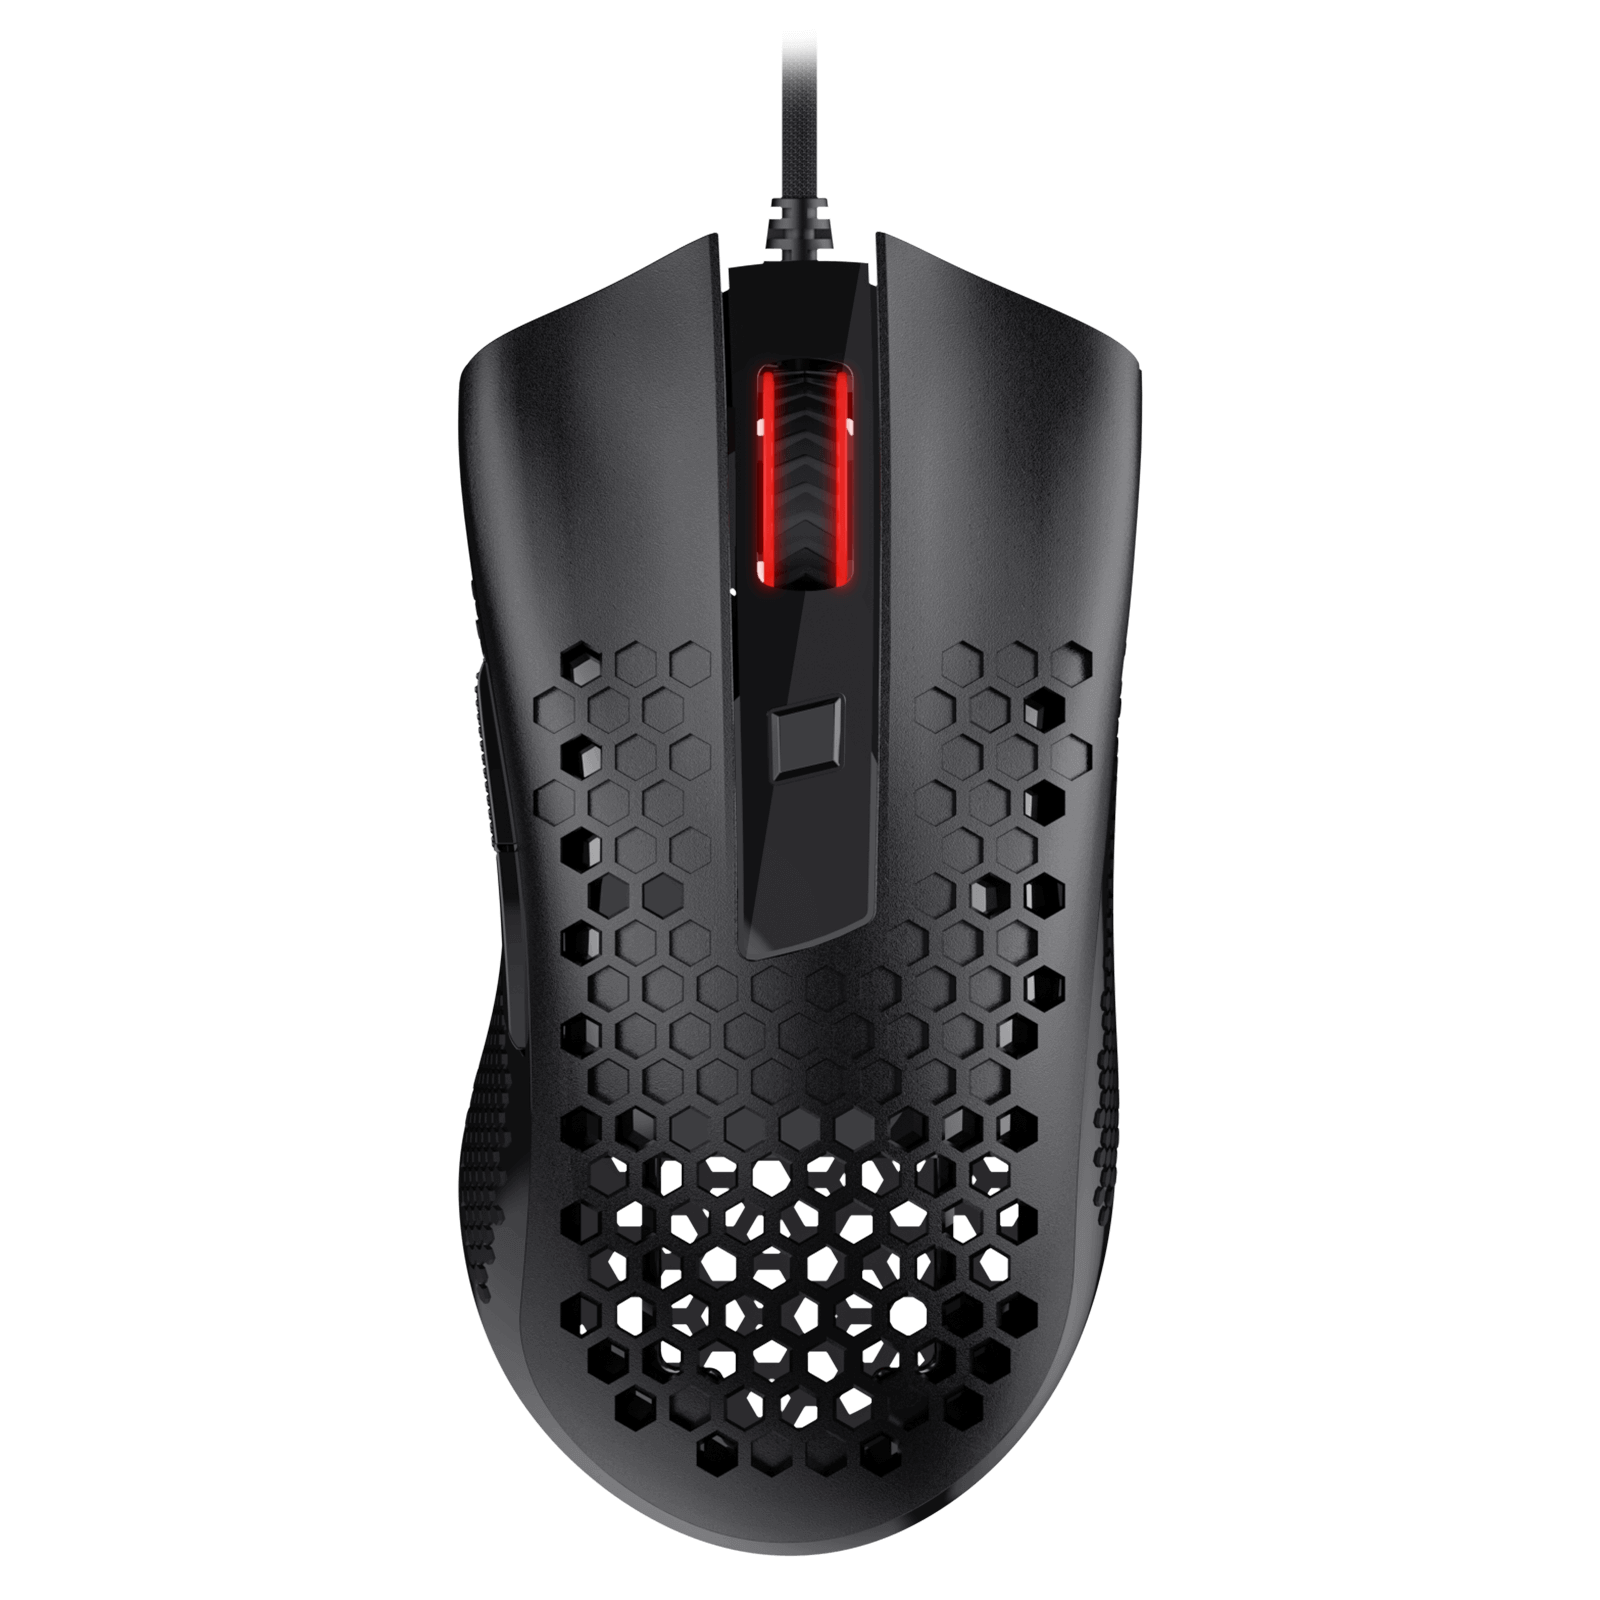 lightest mouse